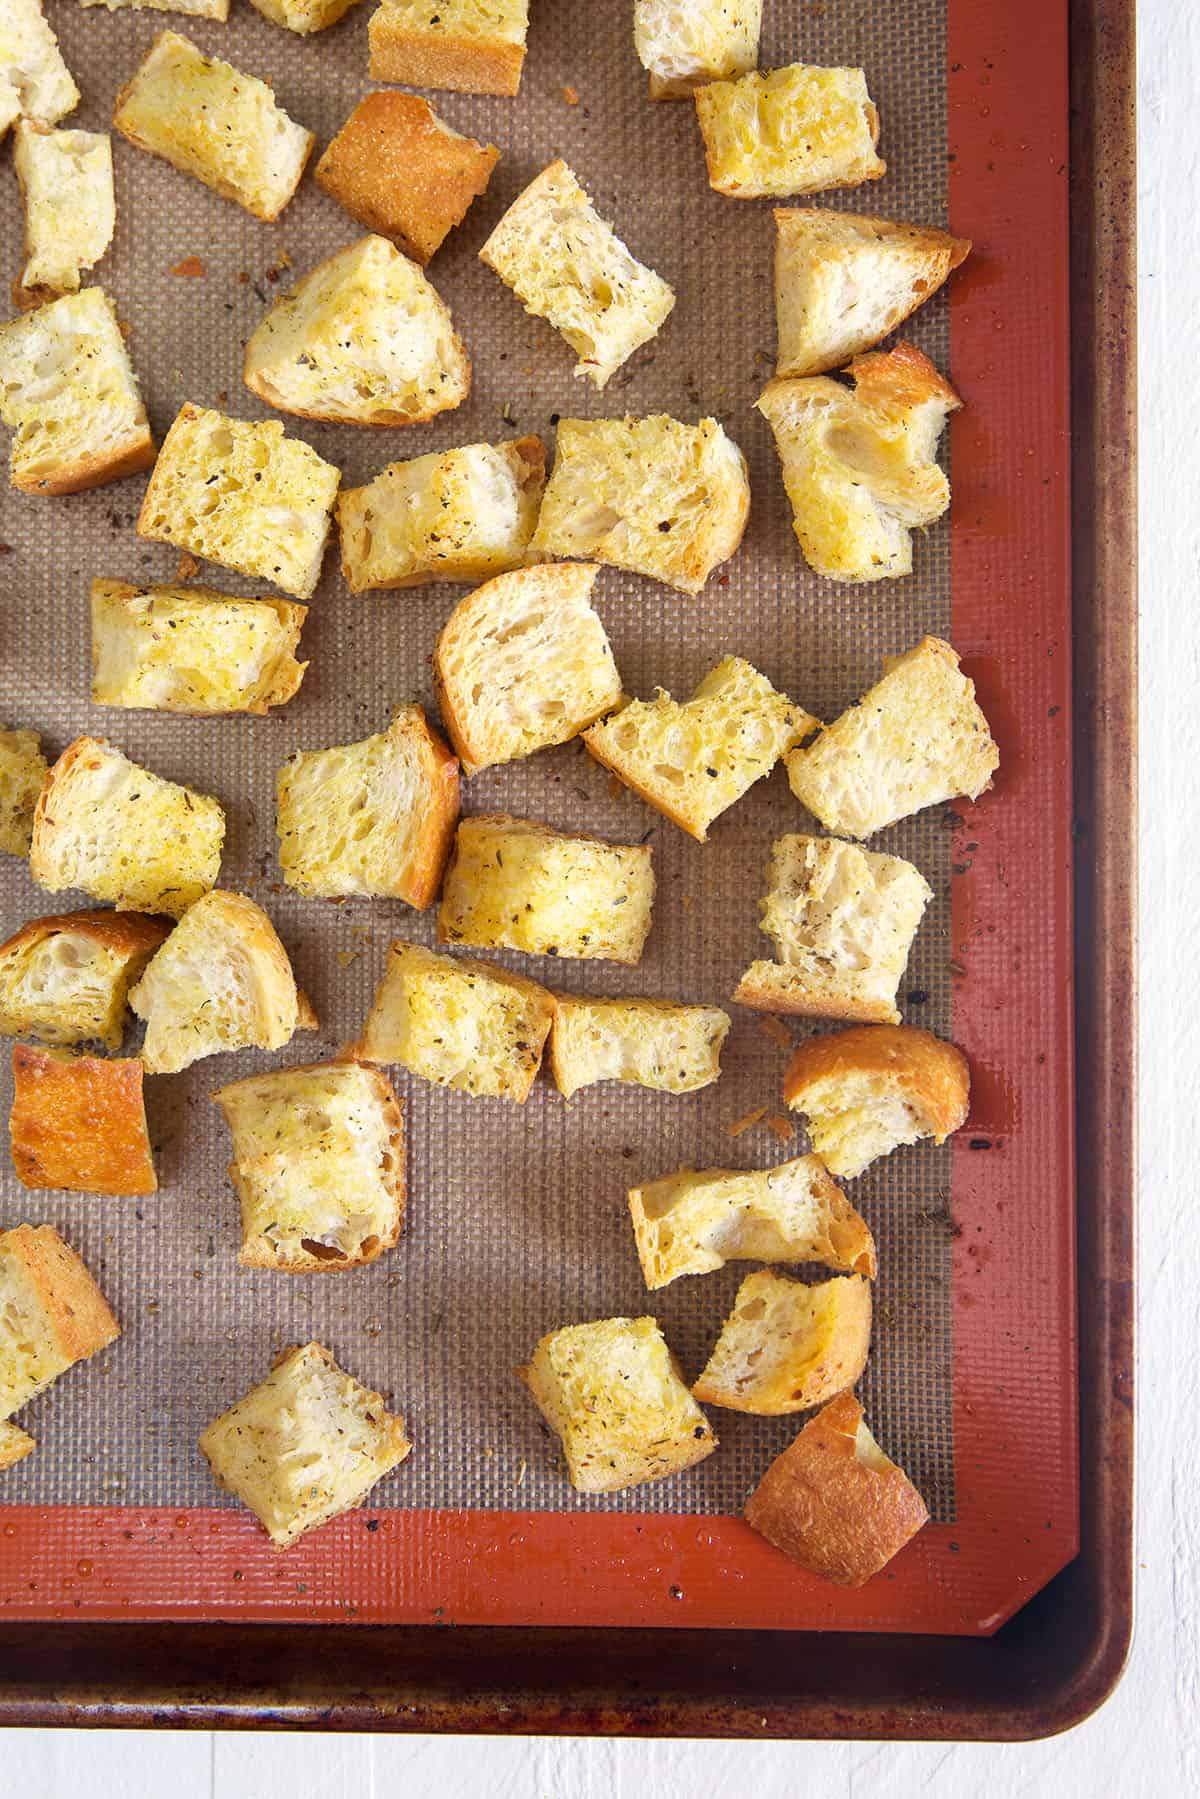 Homemade croutons are baked on a prepared baking sheet.